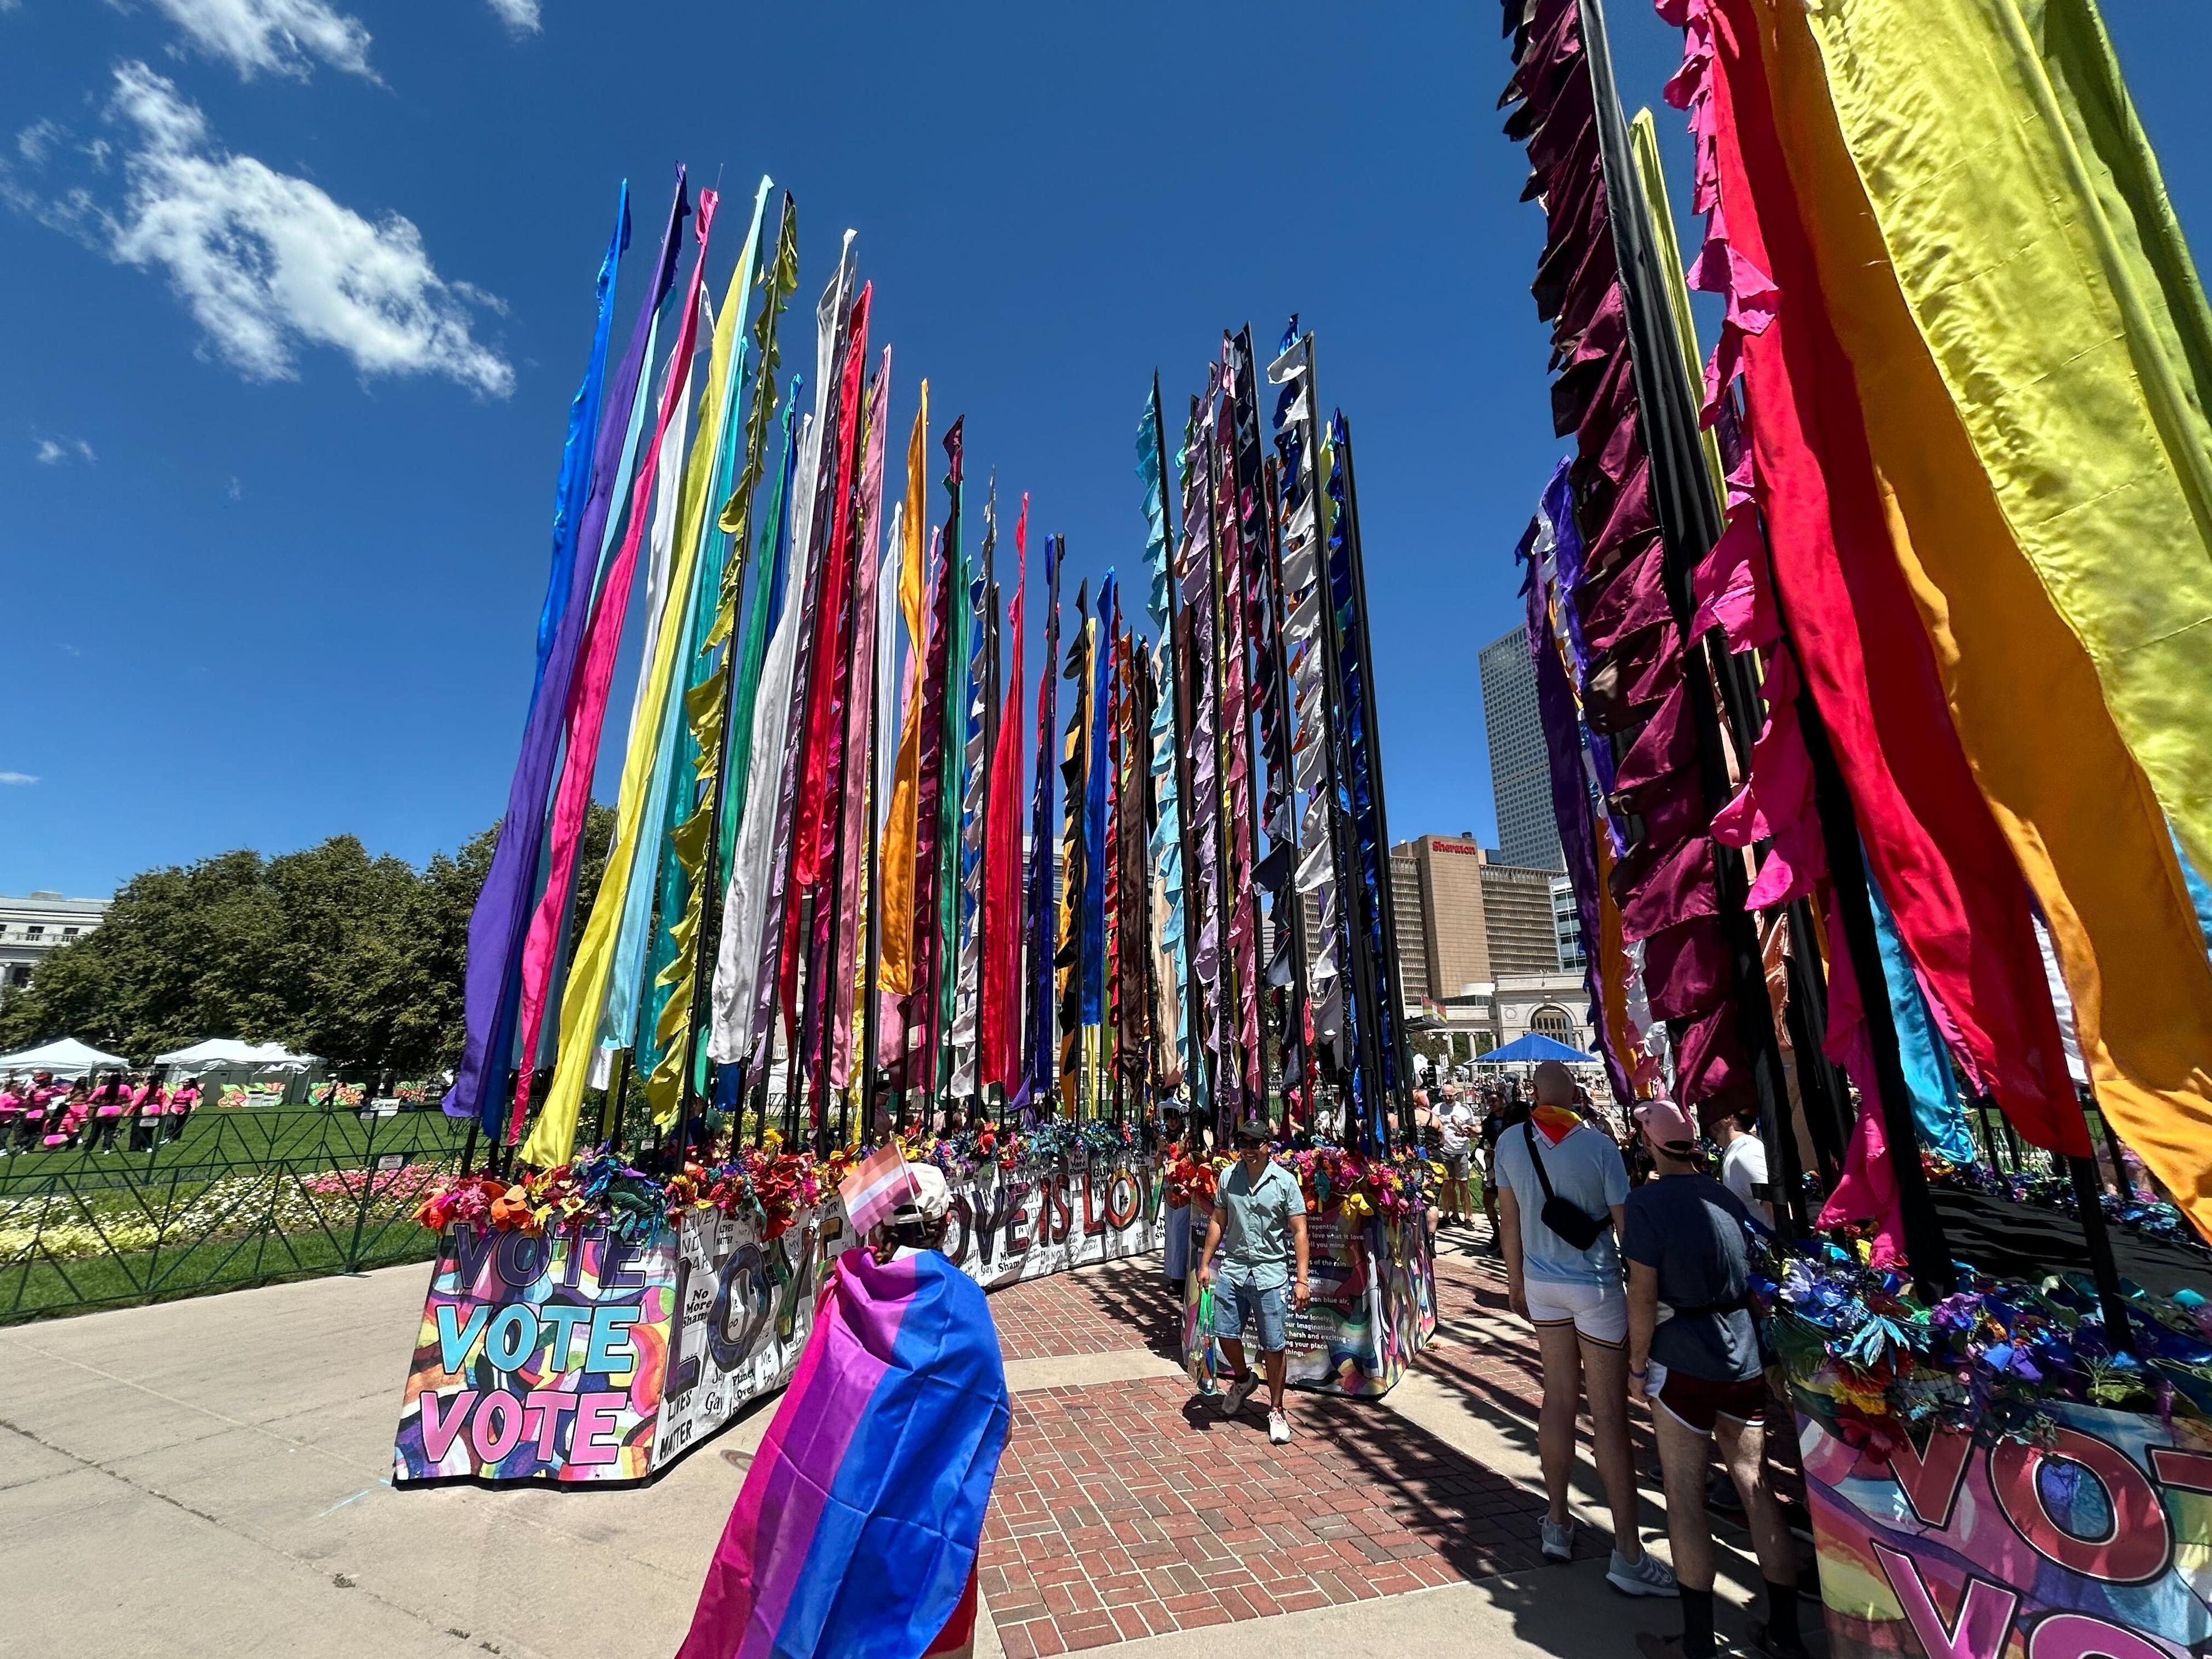 People walk among a sculpture featuring multicolored flags that rise high in the air and flowers.